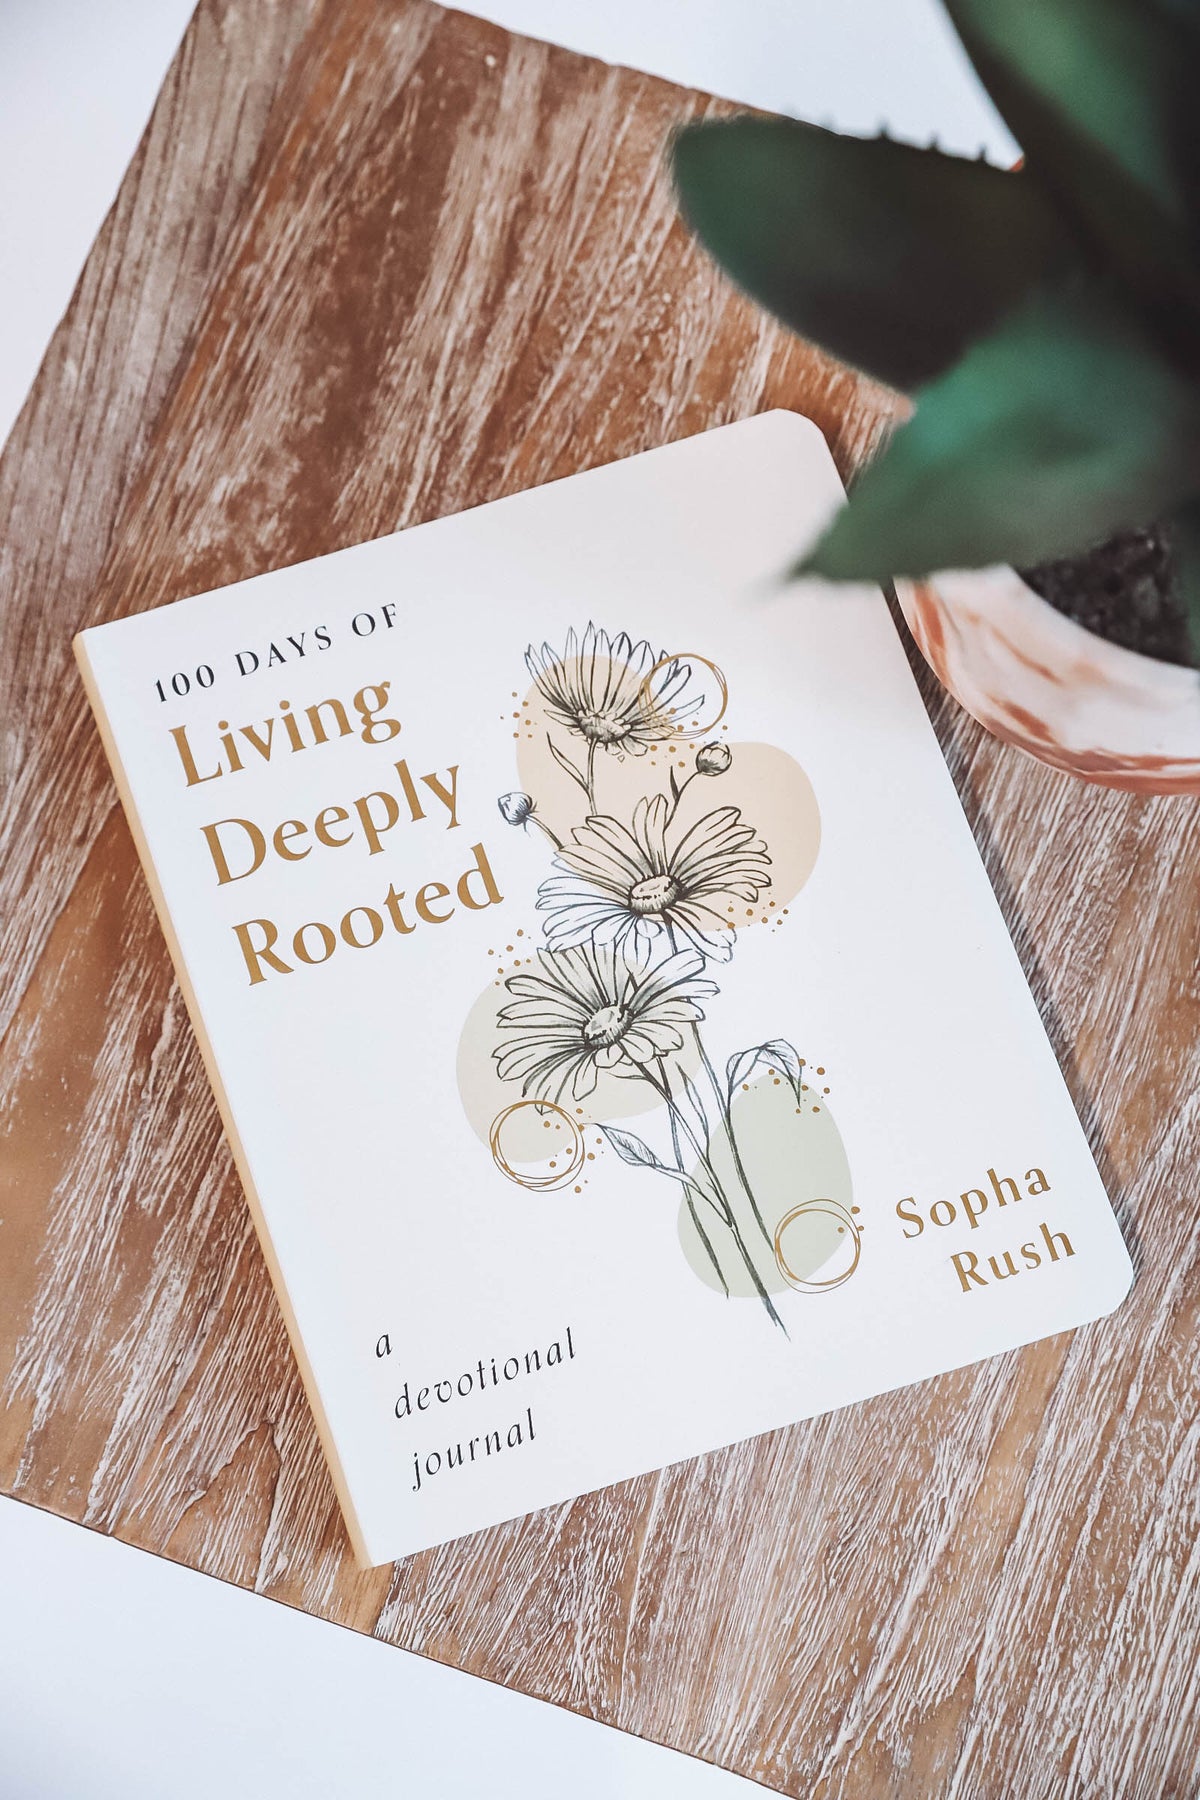 100 Days of Living Deeply Rooted-Devotional Journal